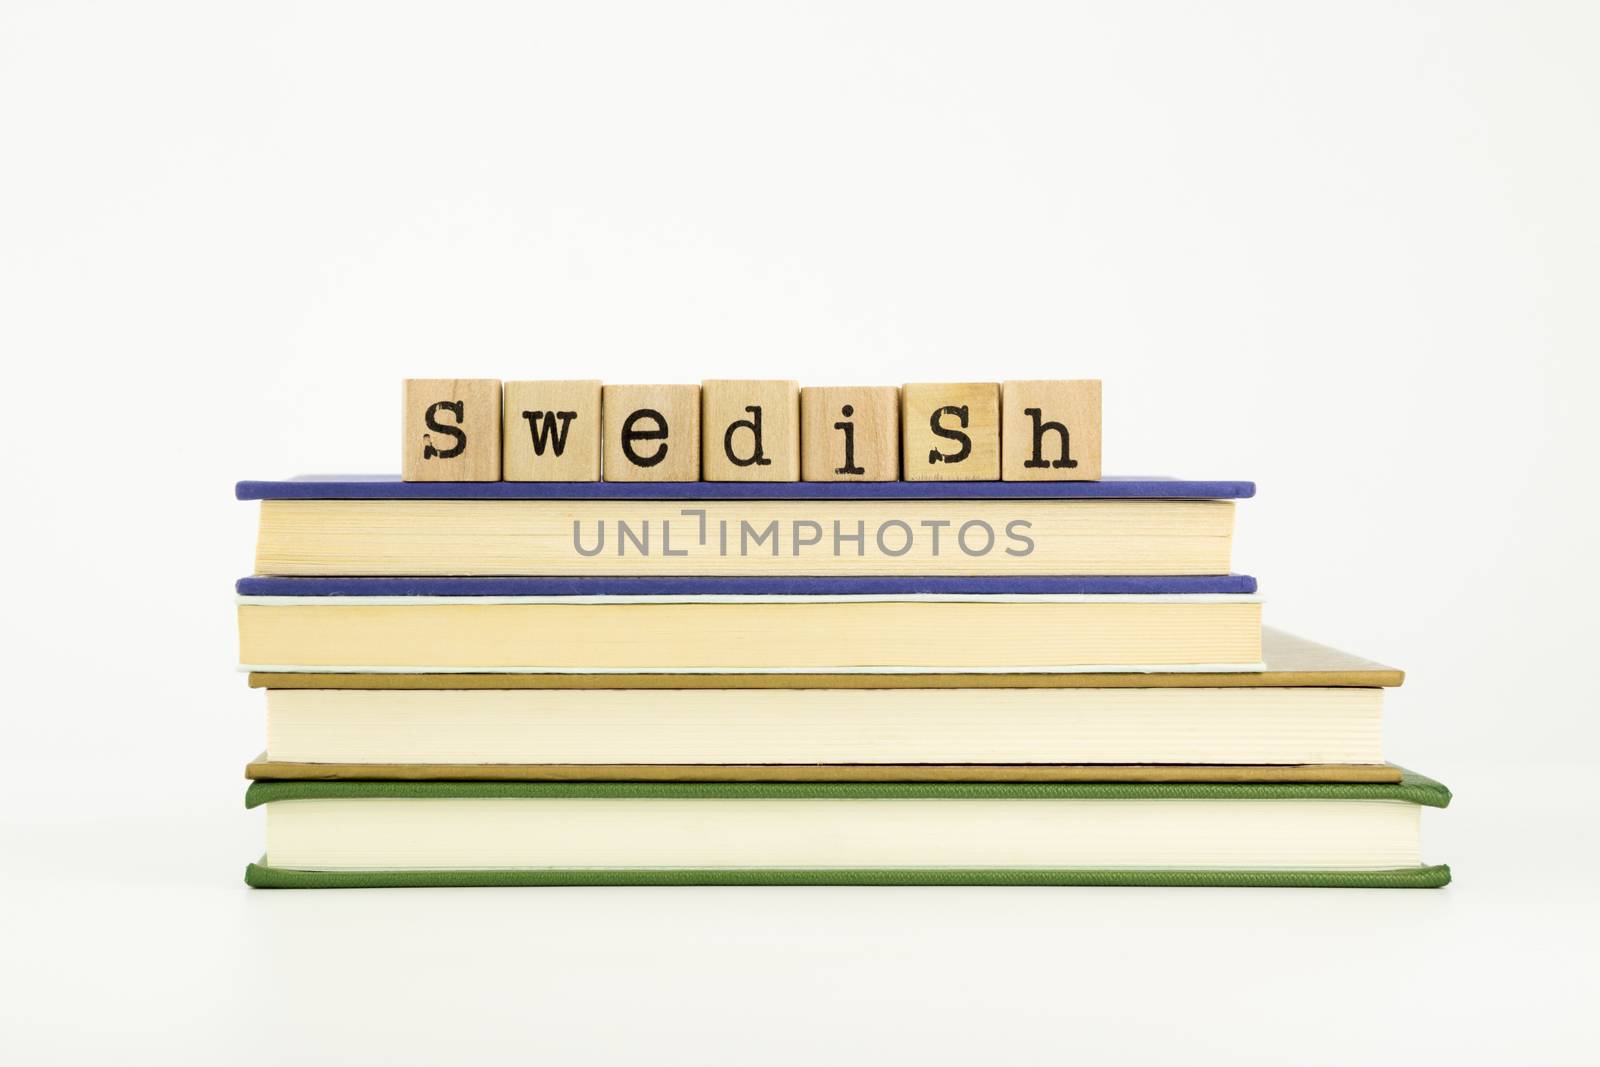 swedish language word on wood stamps and books by vinnstock